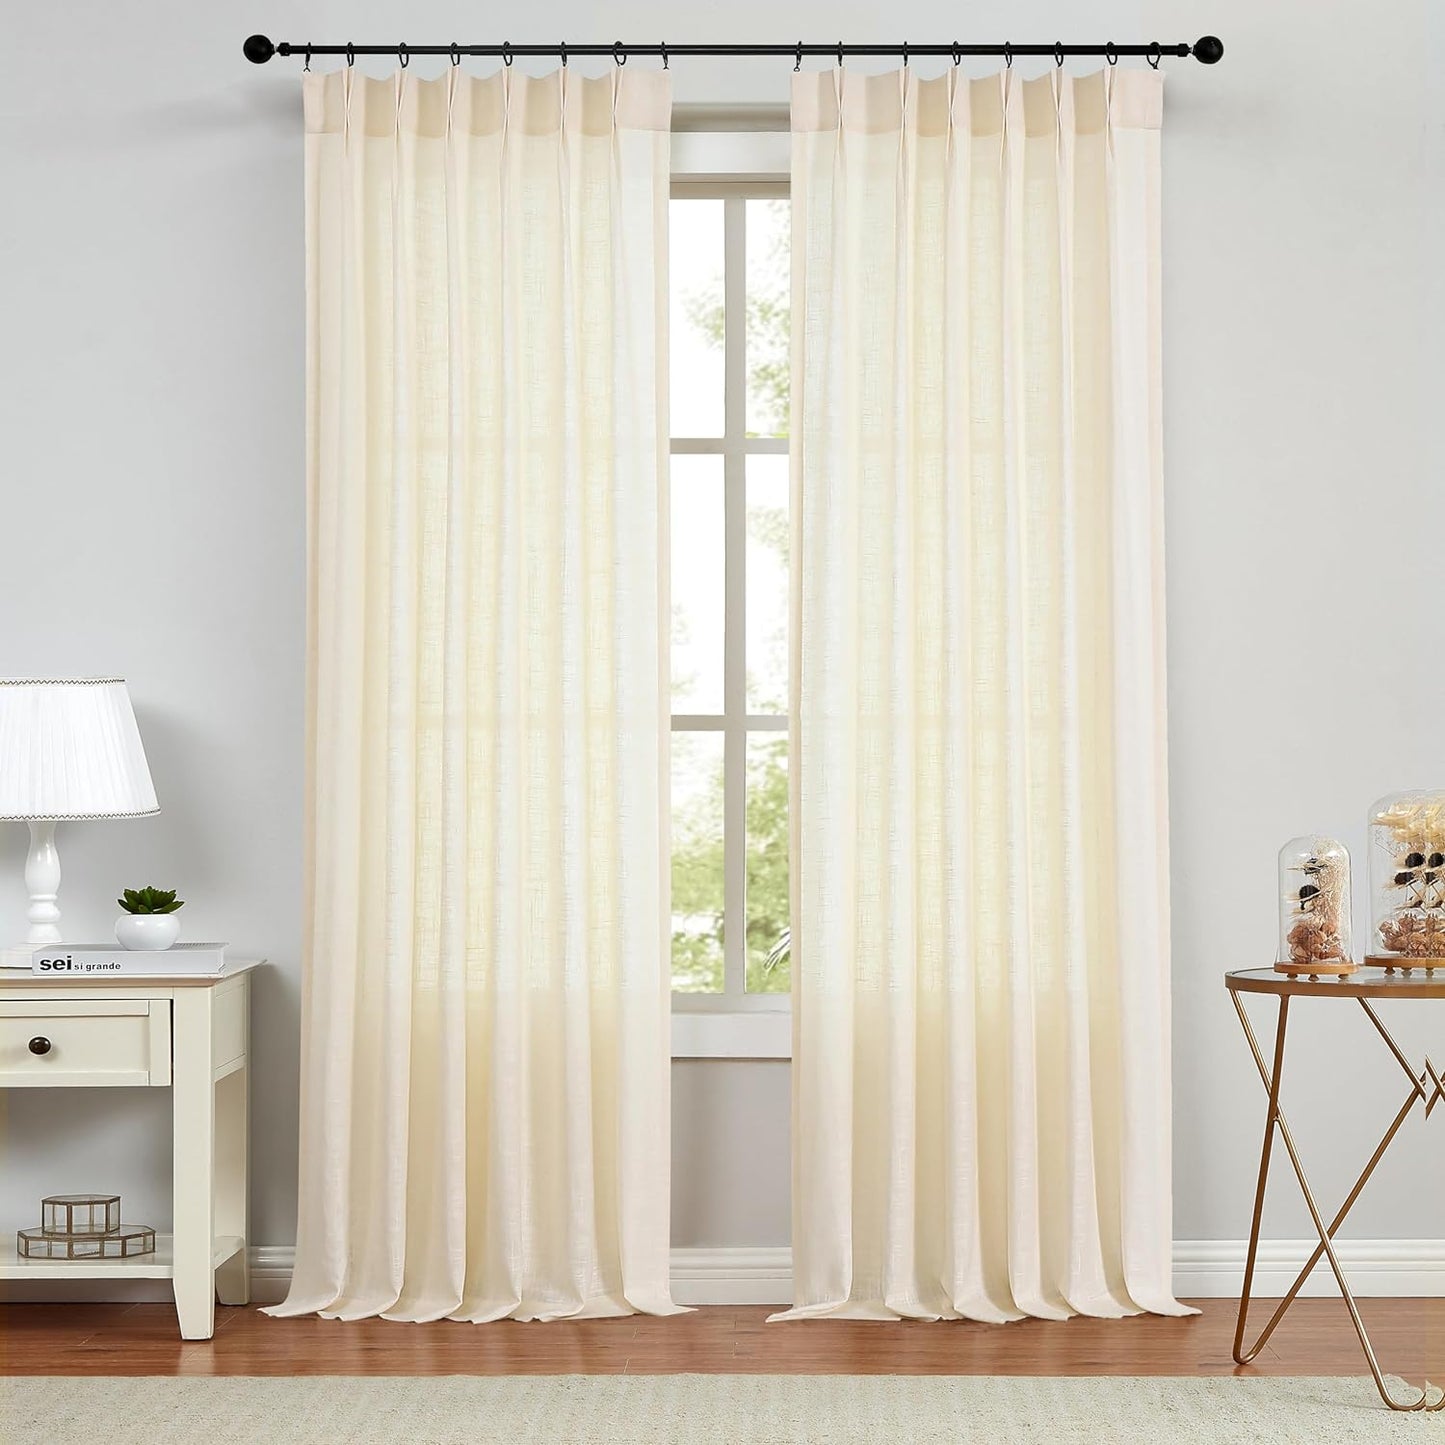 White Pinch Pleated Curtain Semi Sheer Curtain Panel Linen Cotton Blend Decorative Drape 84 Inches Long for Living Room Bedroom Farmhouse Rustic Window Treatment, White, 34"X84"X2  Central Park Ivory 34"X95"X2 